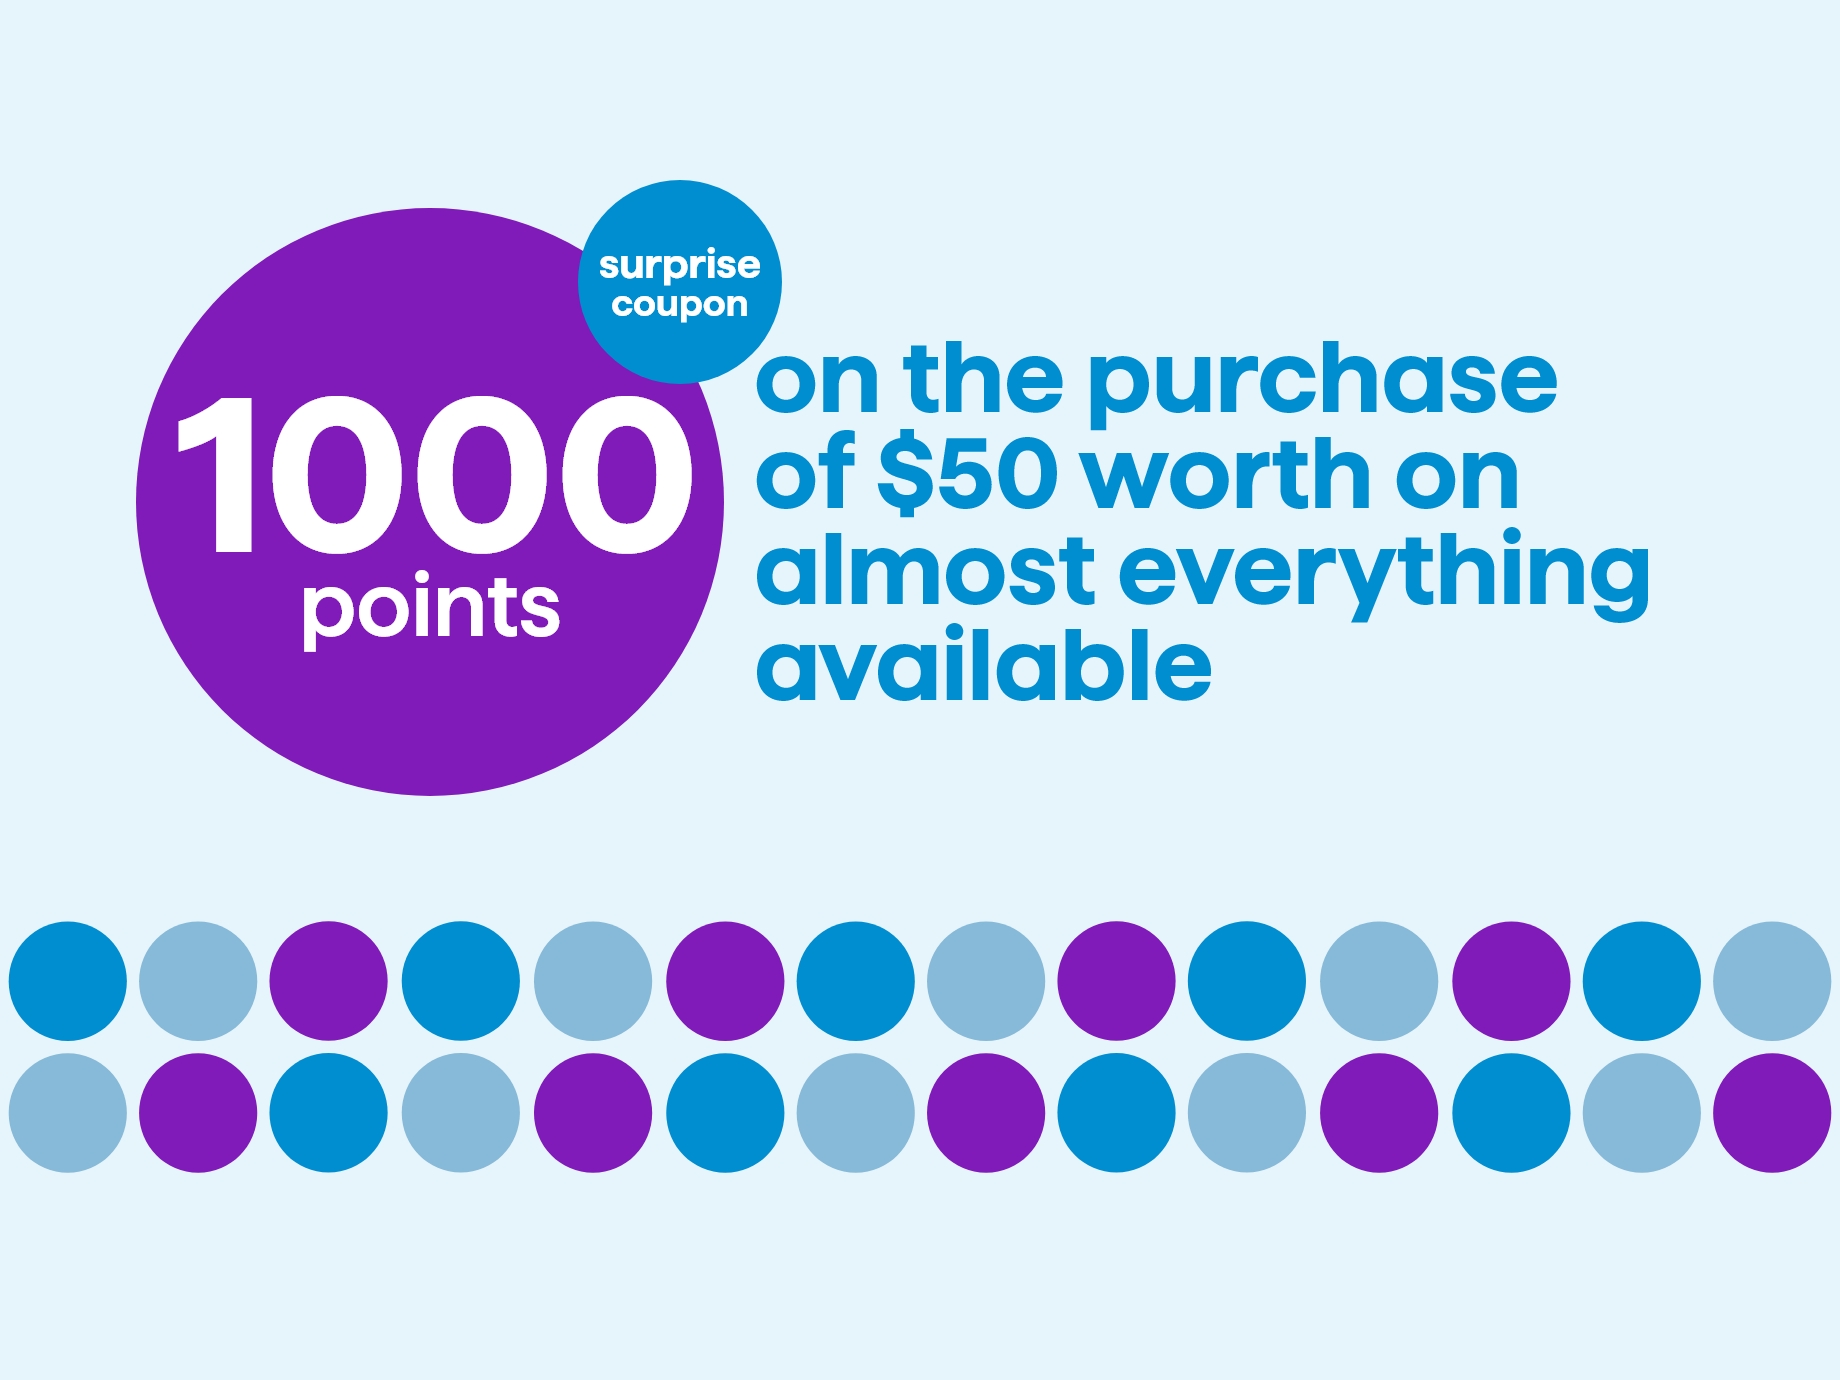 1000 points on the purchase of $50 worth on almost everything available